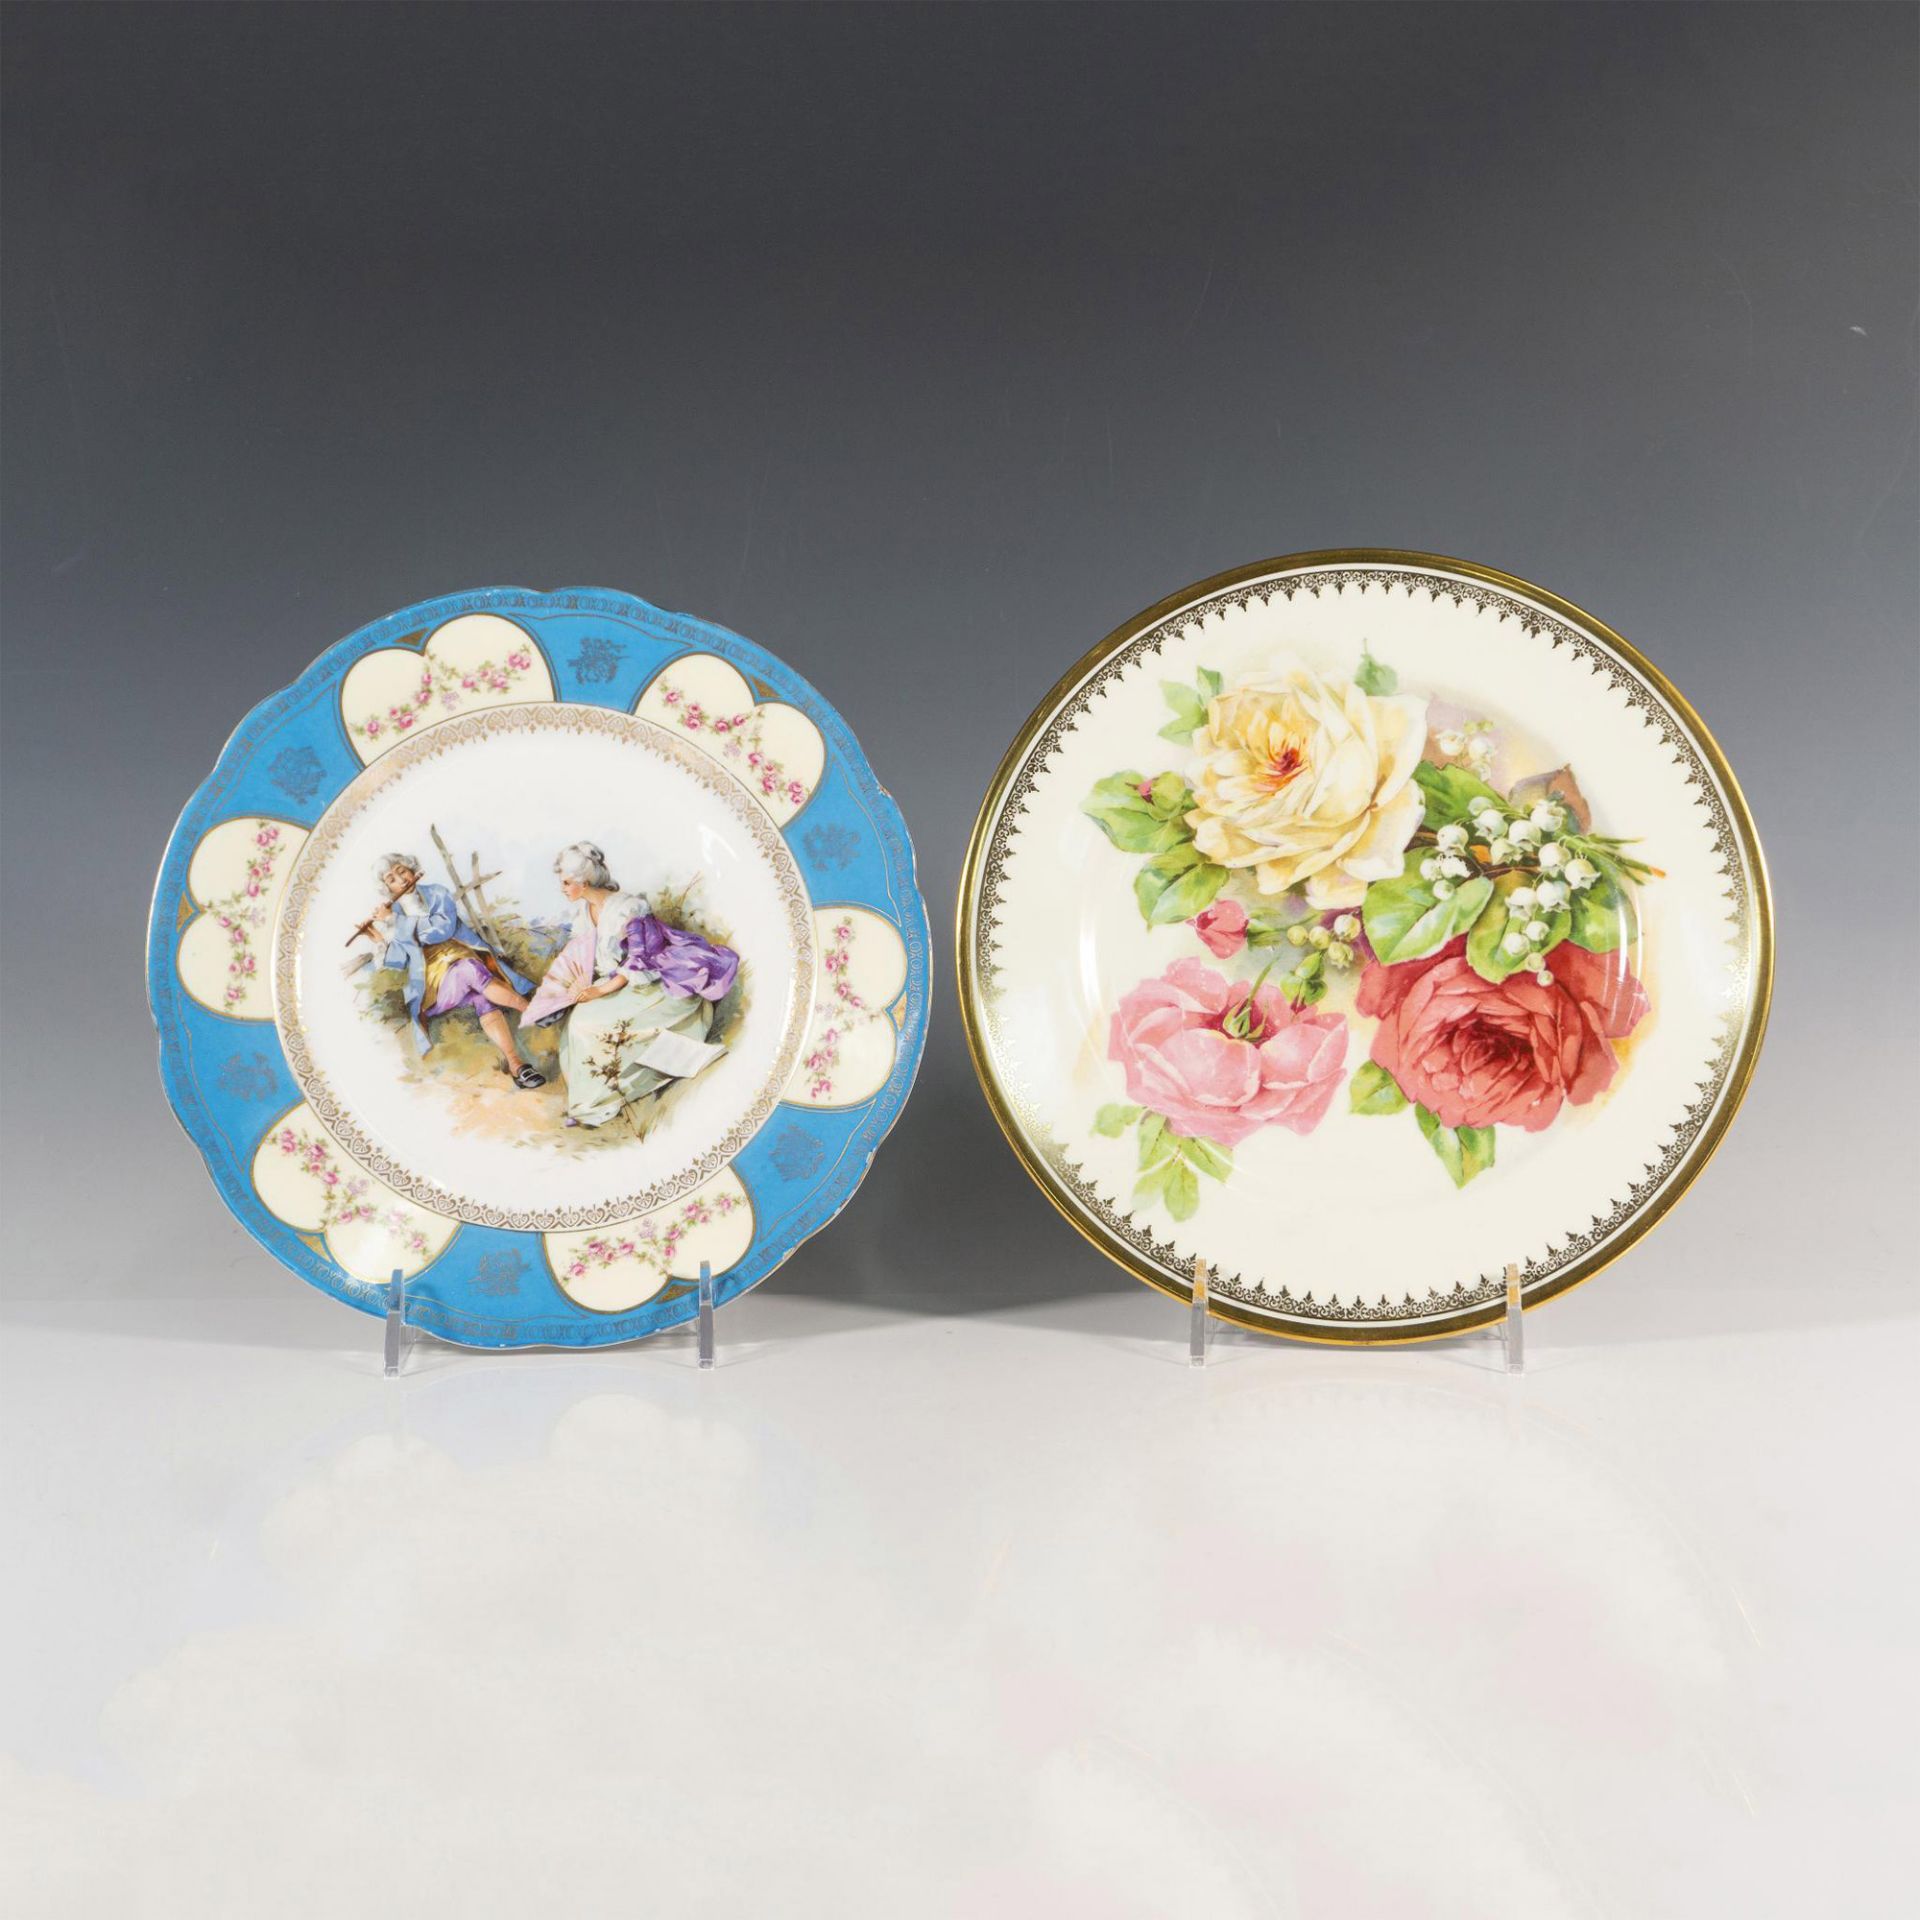 2pc Vintage Handpainted China Plates, Rosenthal and C.T.